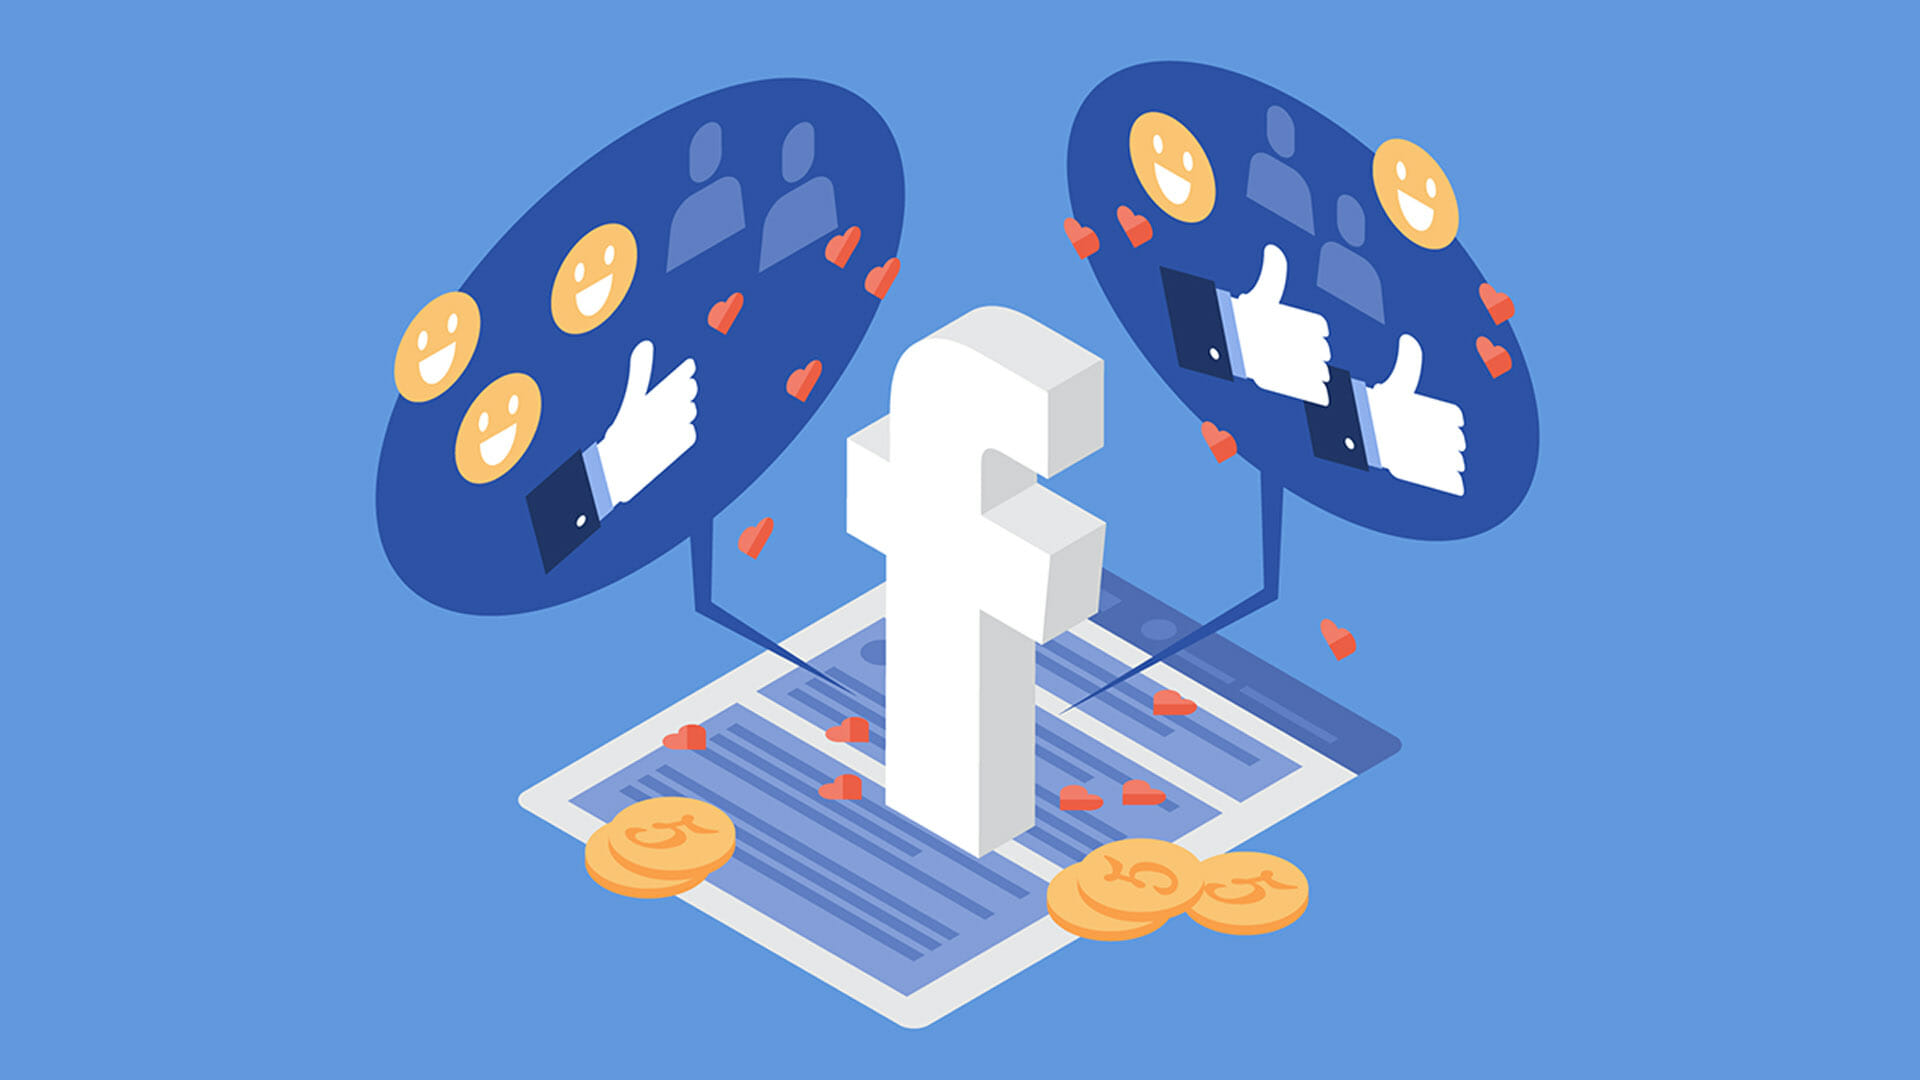 Everything you need to know: the costs of advertising on Facebook in 2022